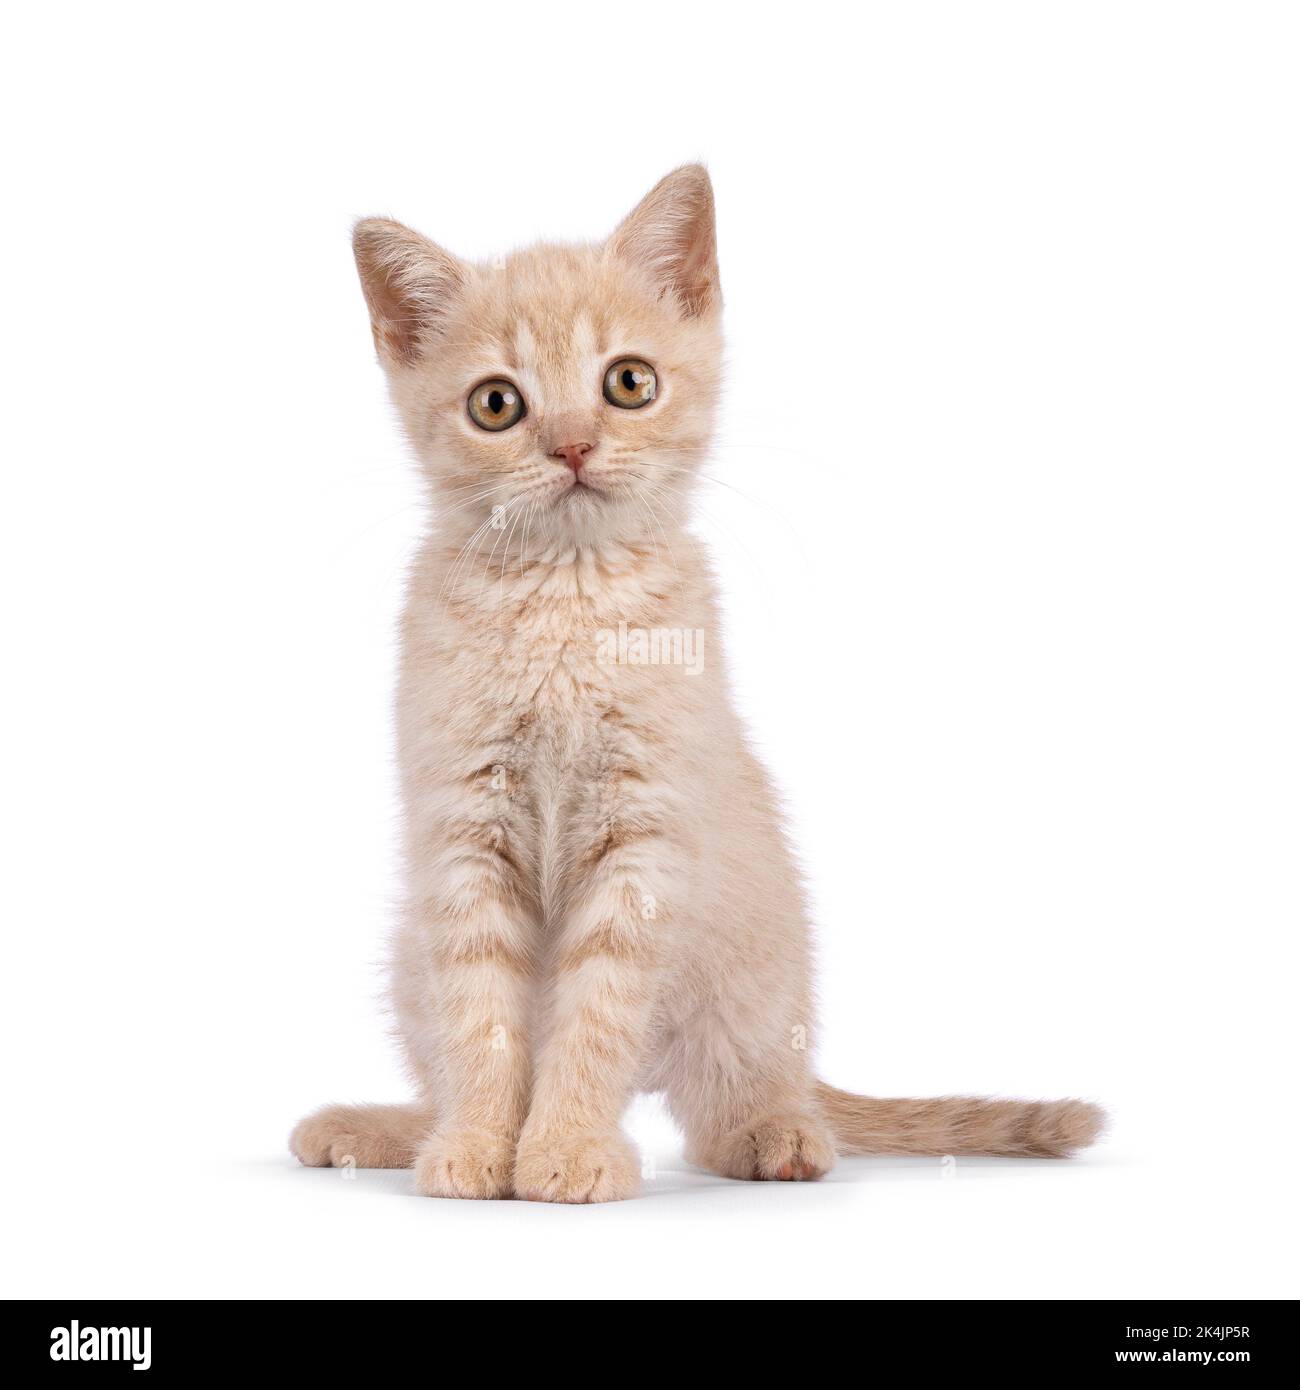 Sweet creme British Shorthair cat kitten, sitting up fiercely. Looking curious towards camera. Isolated on a white background. Stock Photo